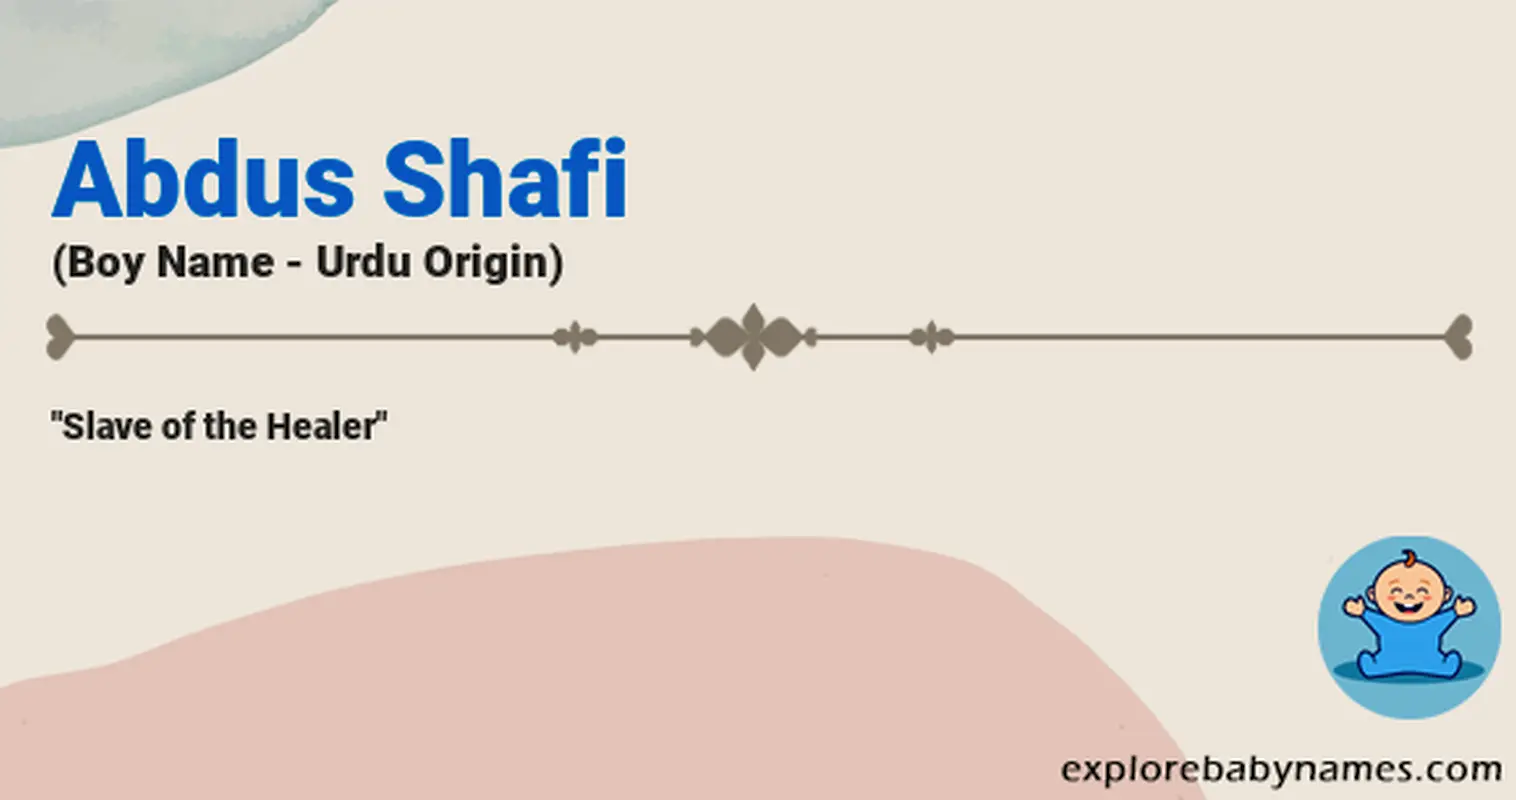 Meaning of Abdus Shafi